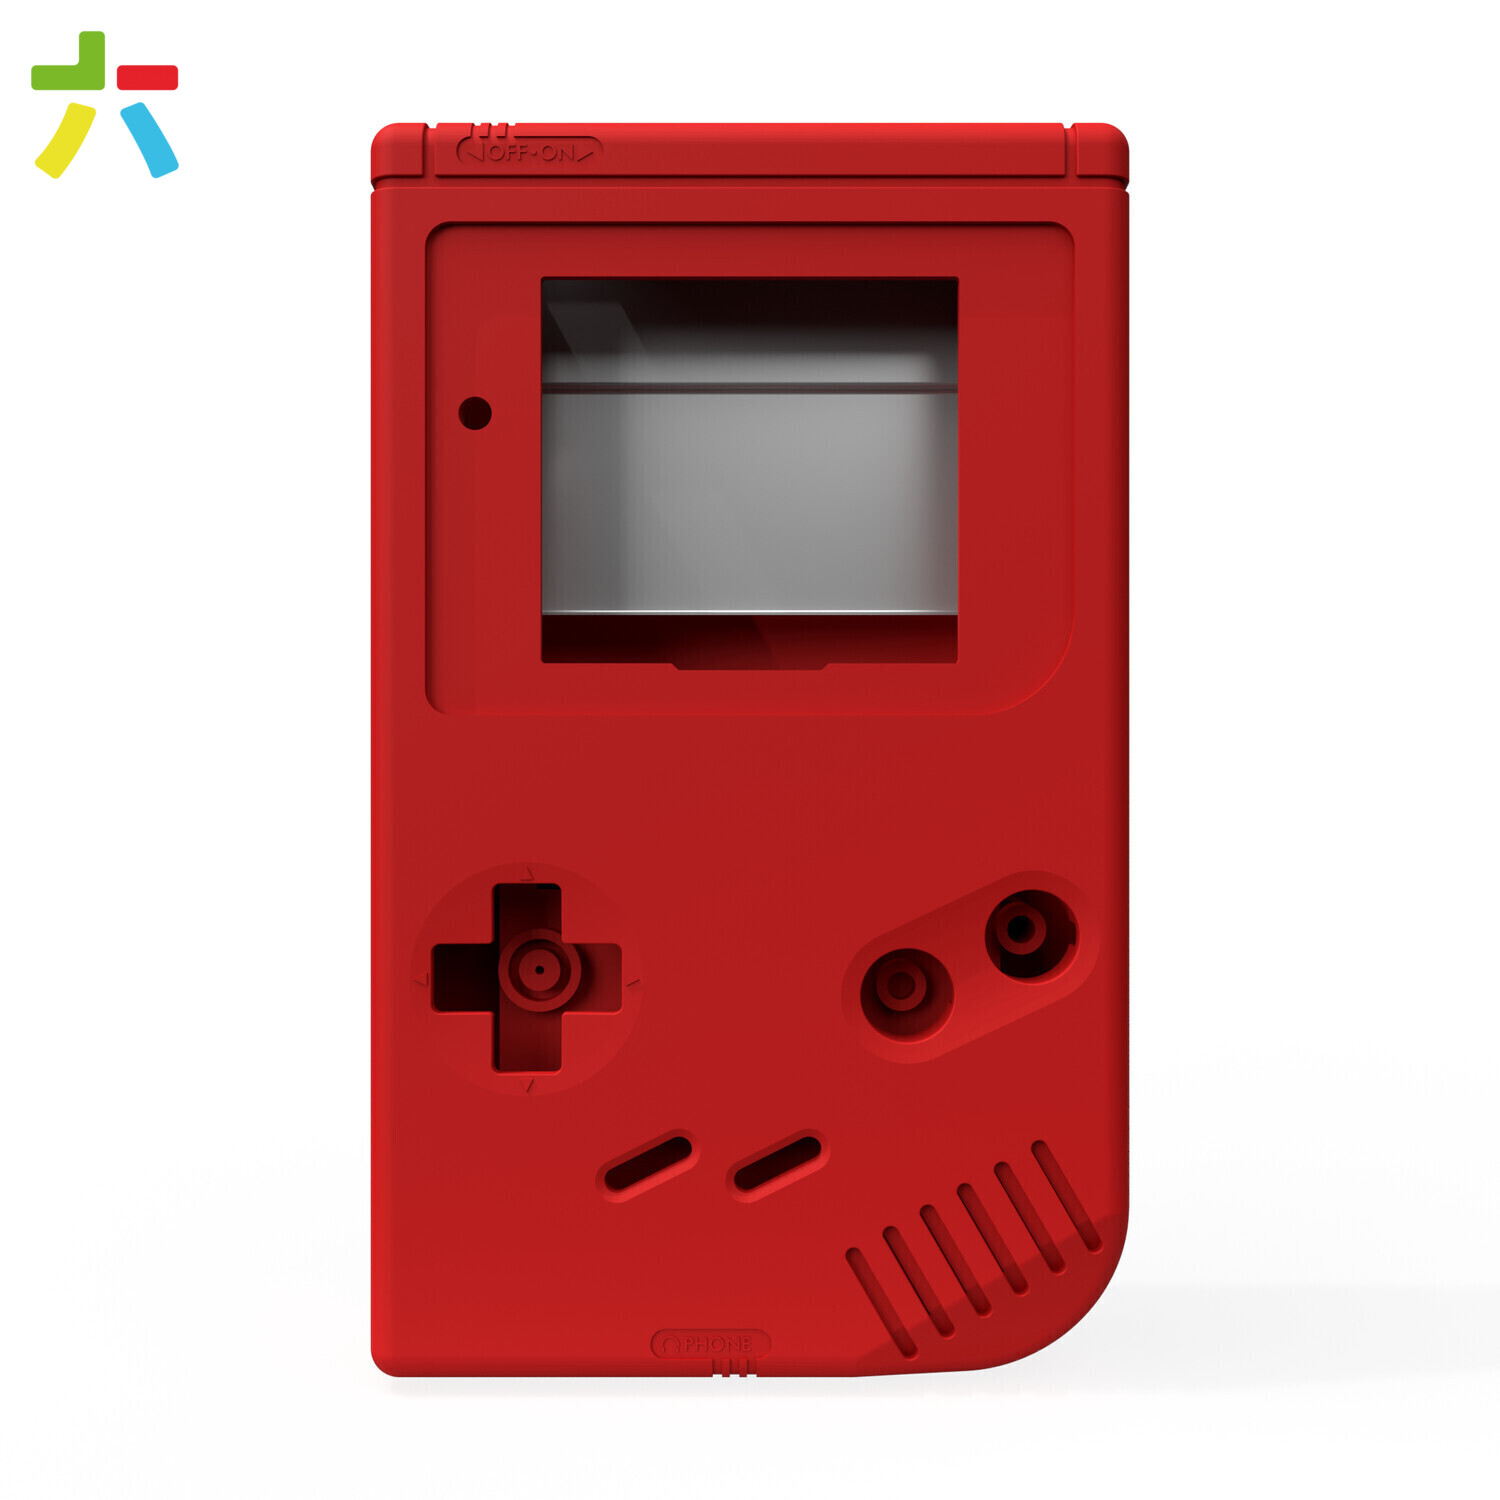 Game Boy Original Shell Kit (Solid Red)